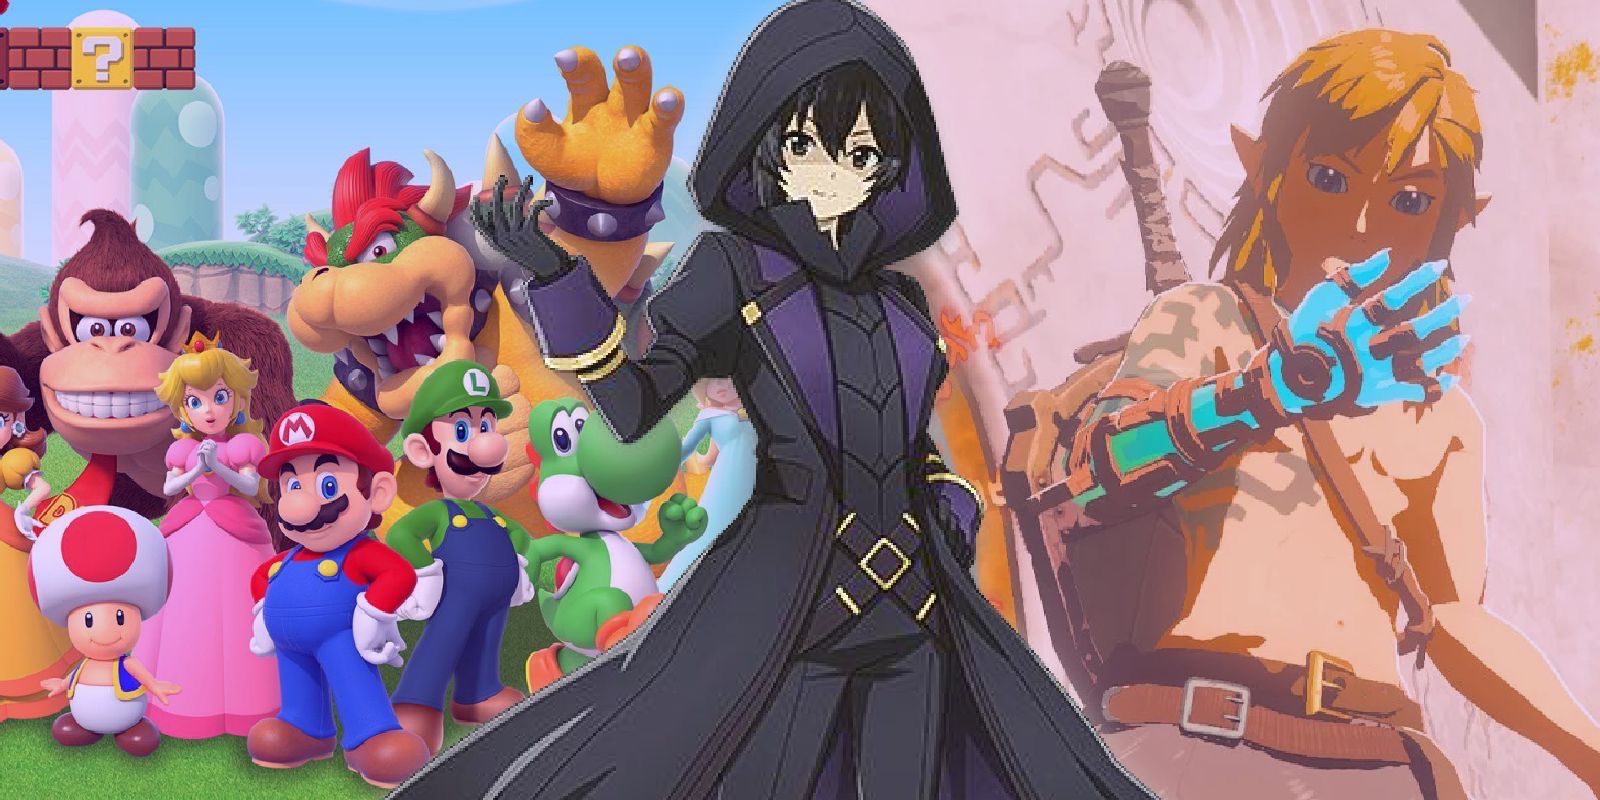 Cid from the eminence in shadow posing in front of Link in tears of the kingdom and Mario bros